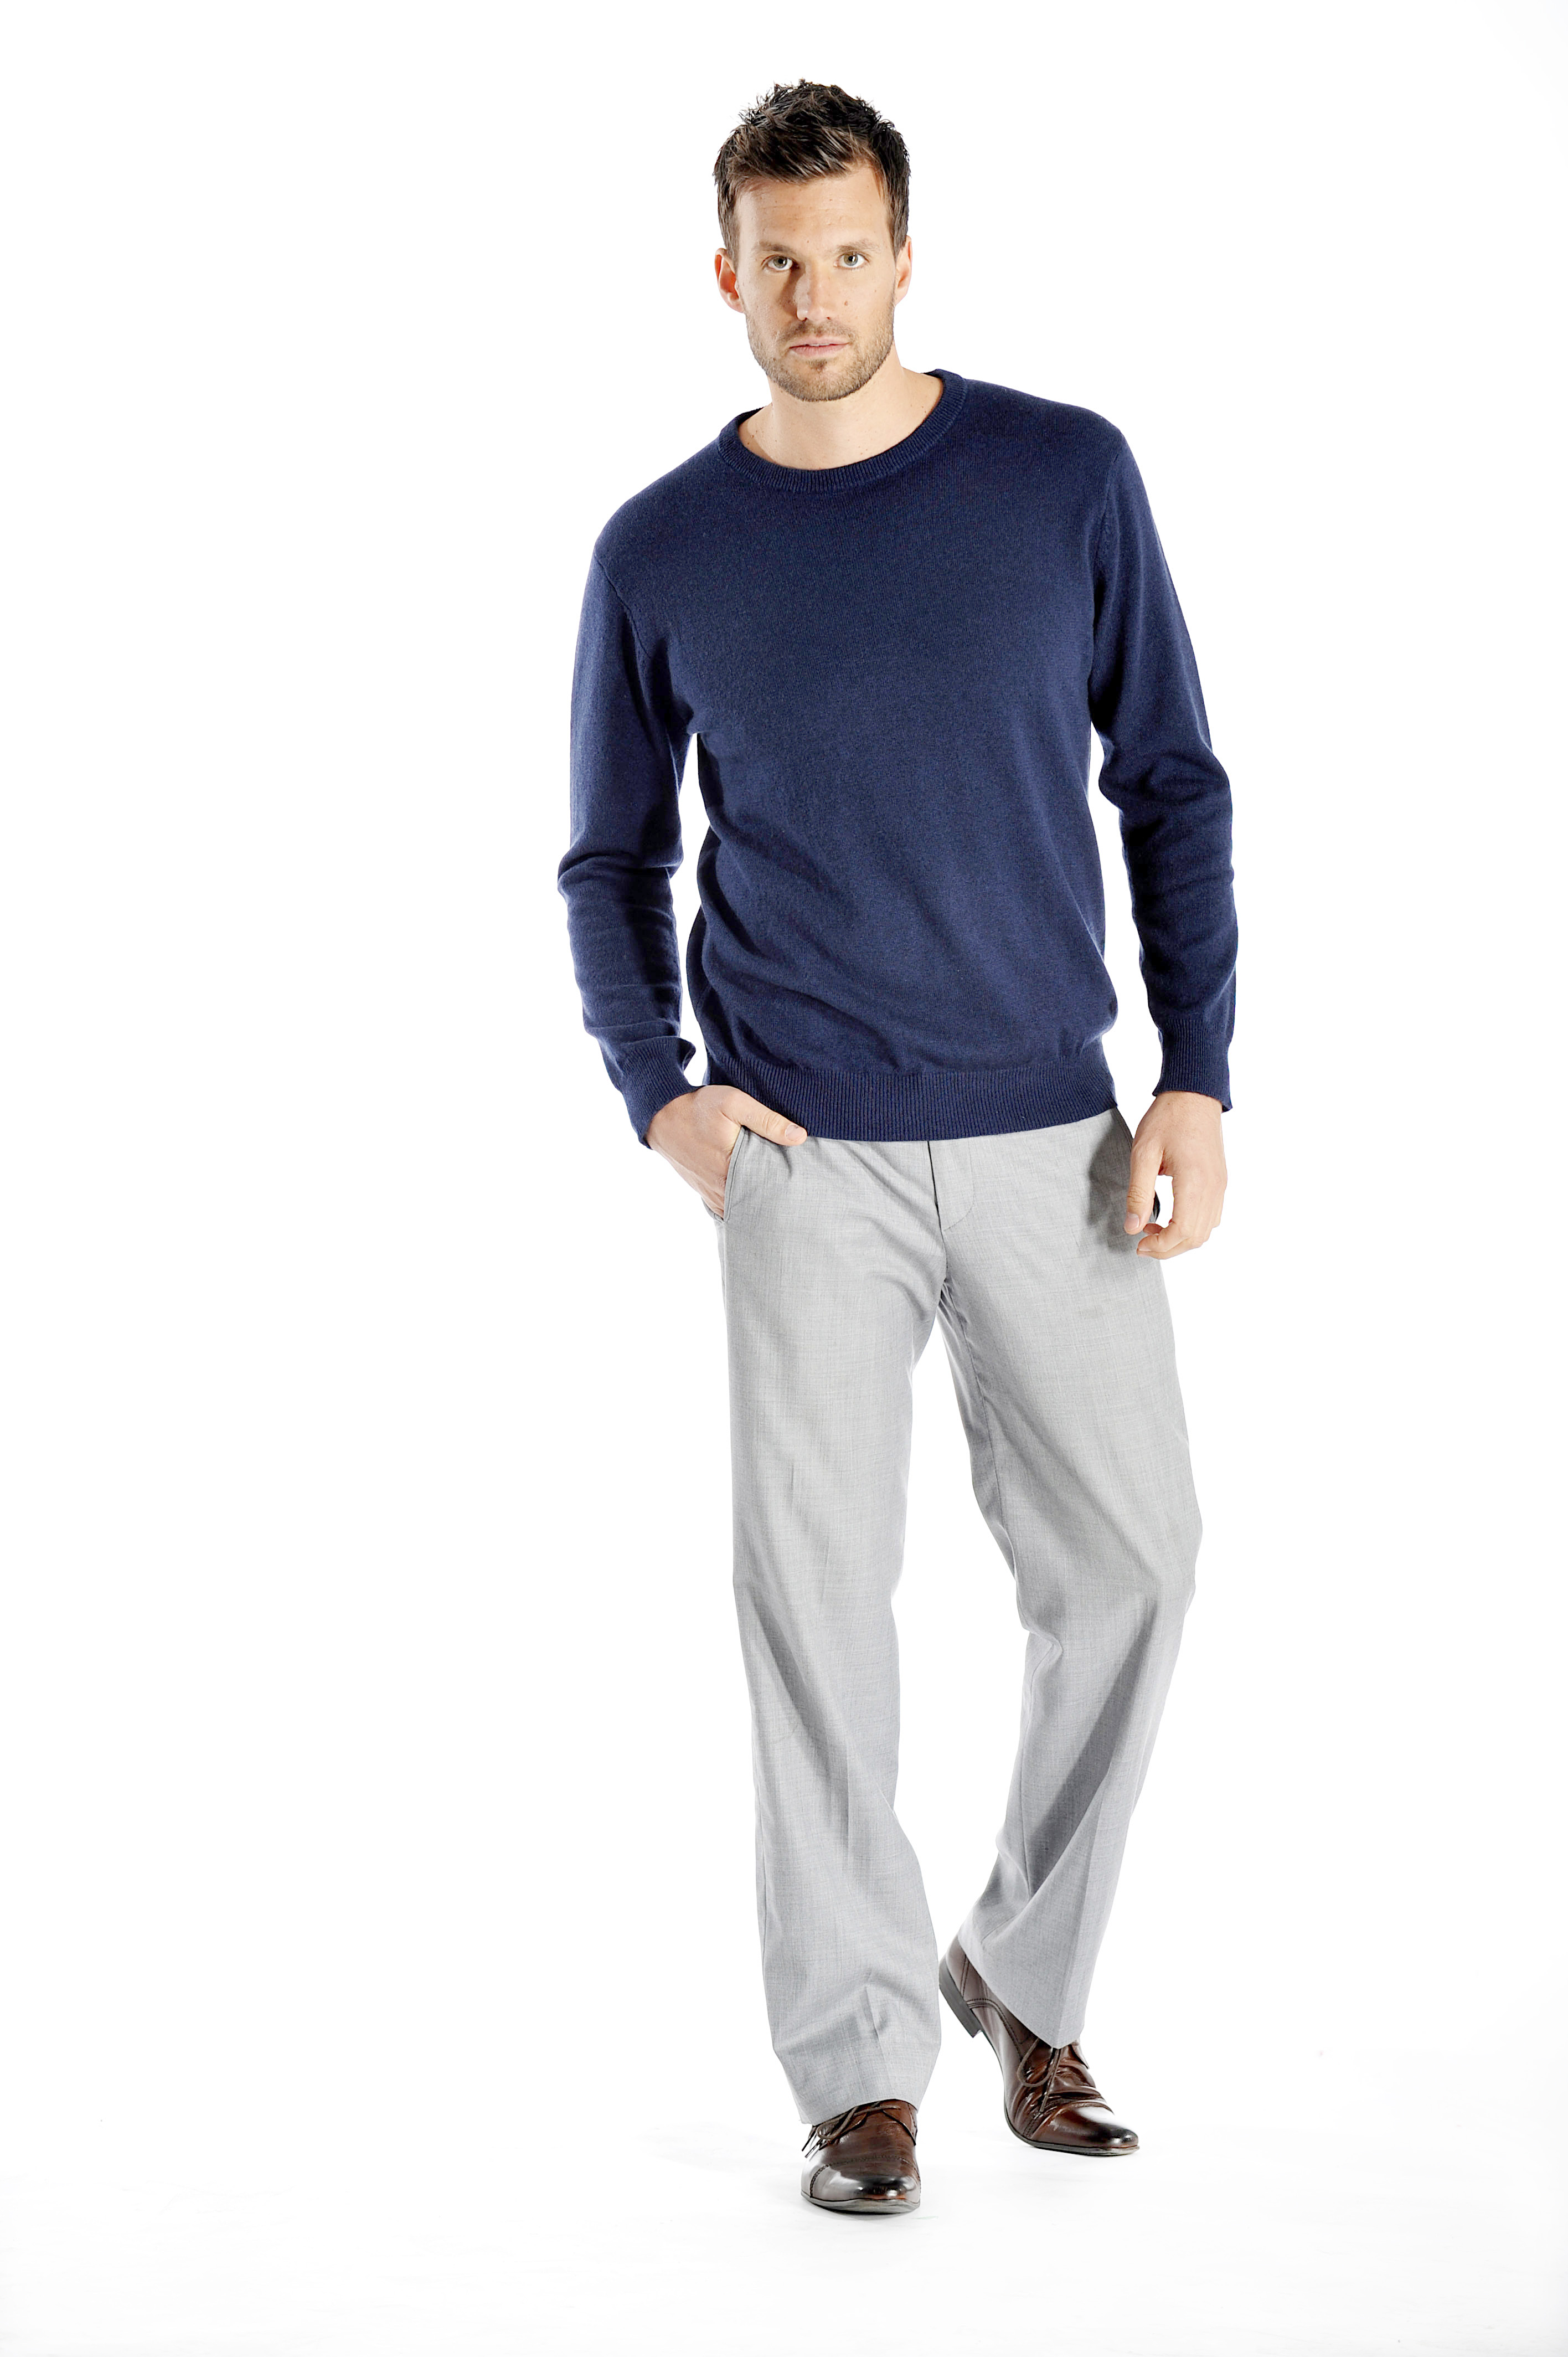 Men\'s Crew Neck Cashmere Sweater (Charcoal, Large)